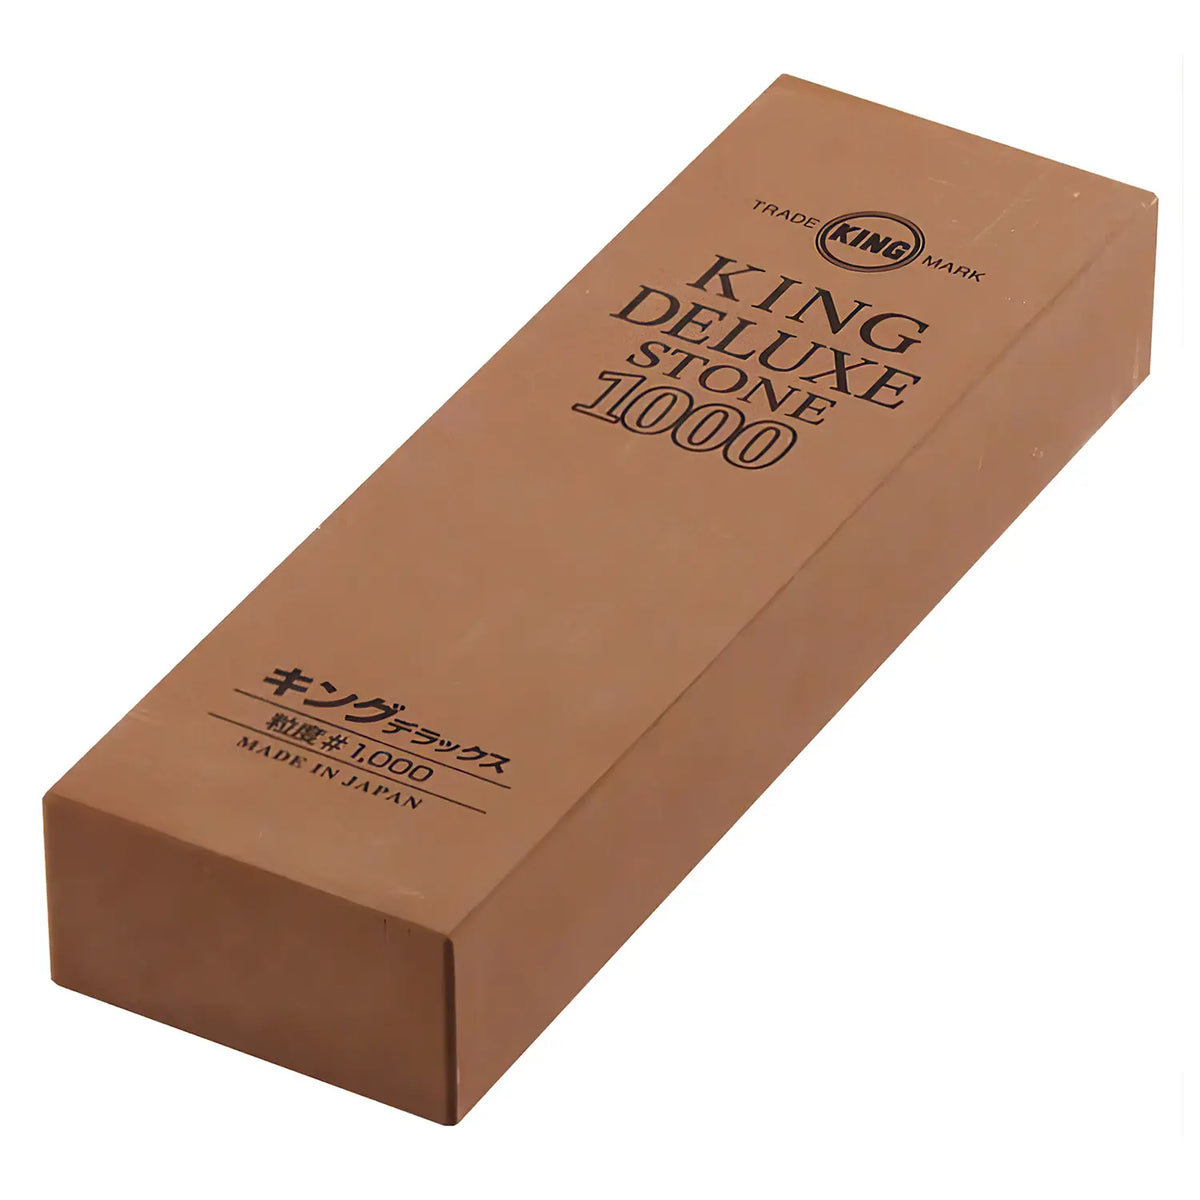 KING DELUXE Sharpening Stone